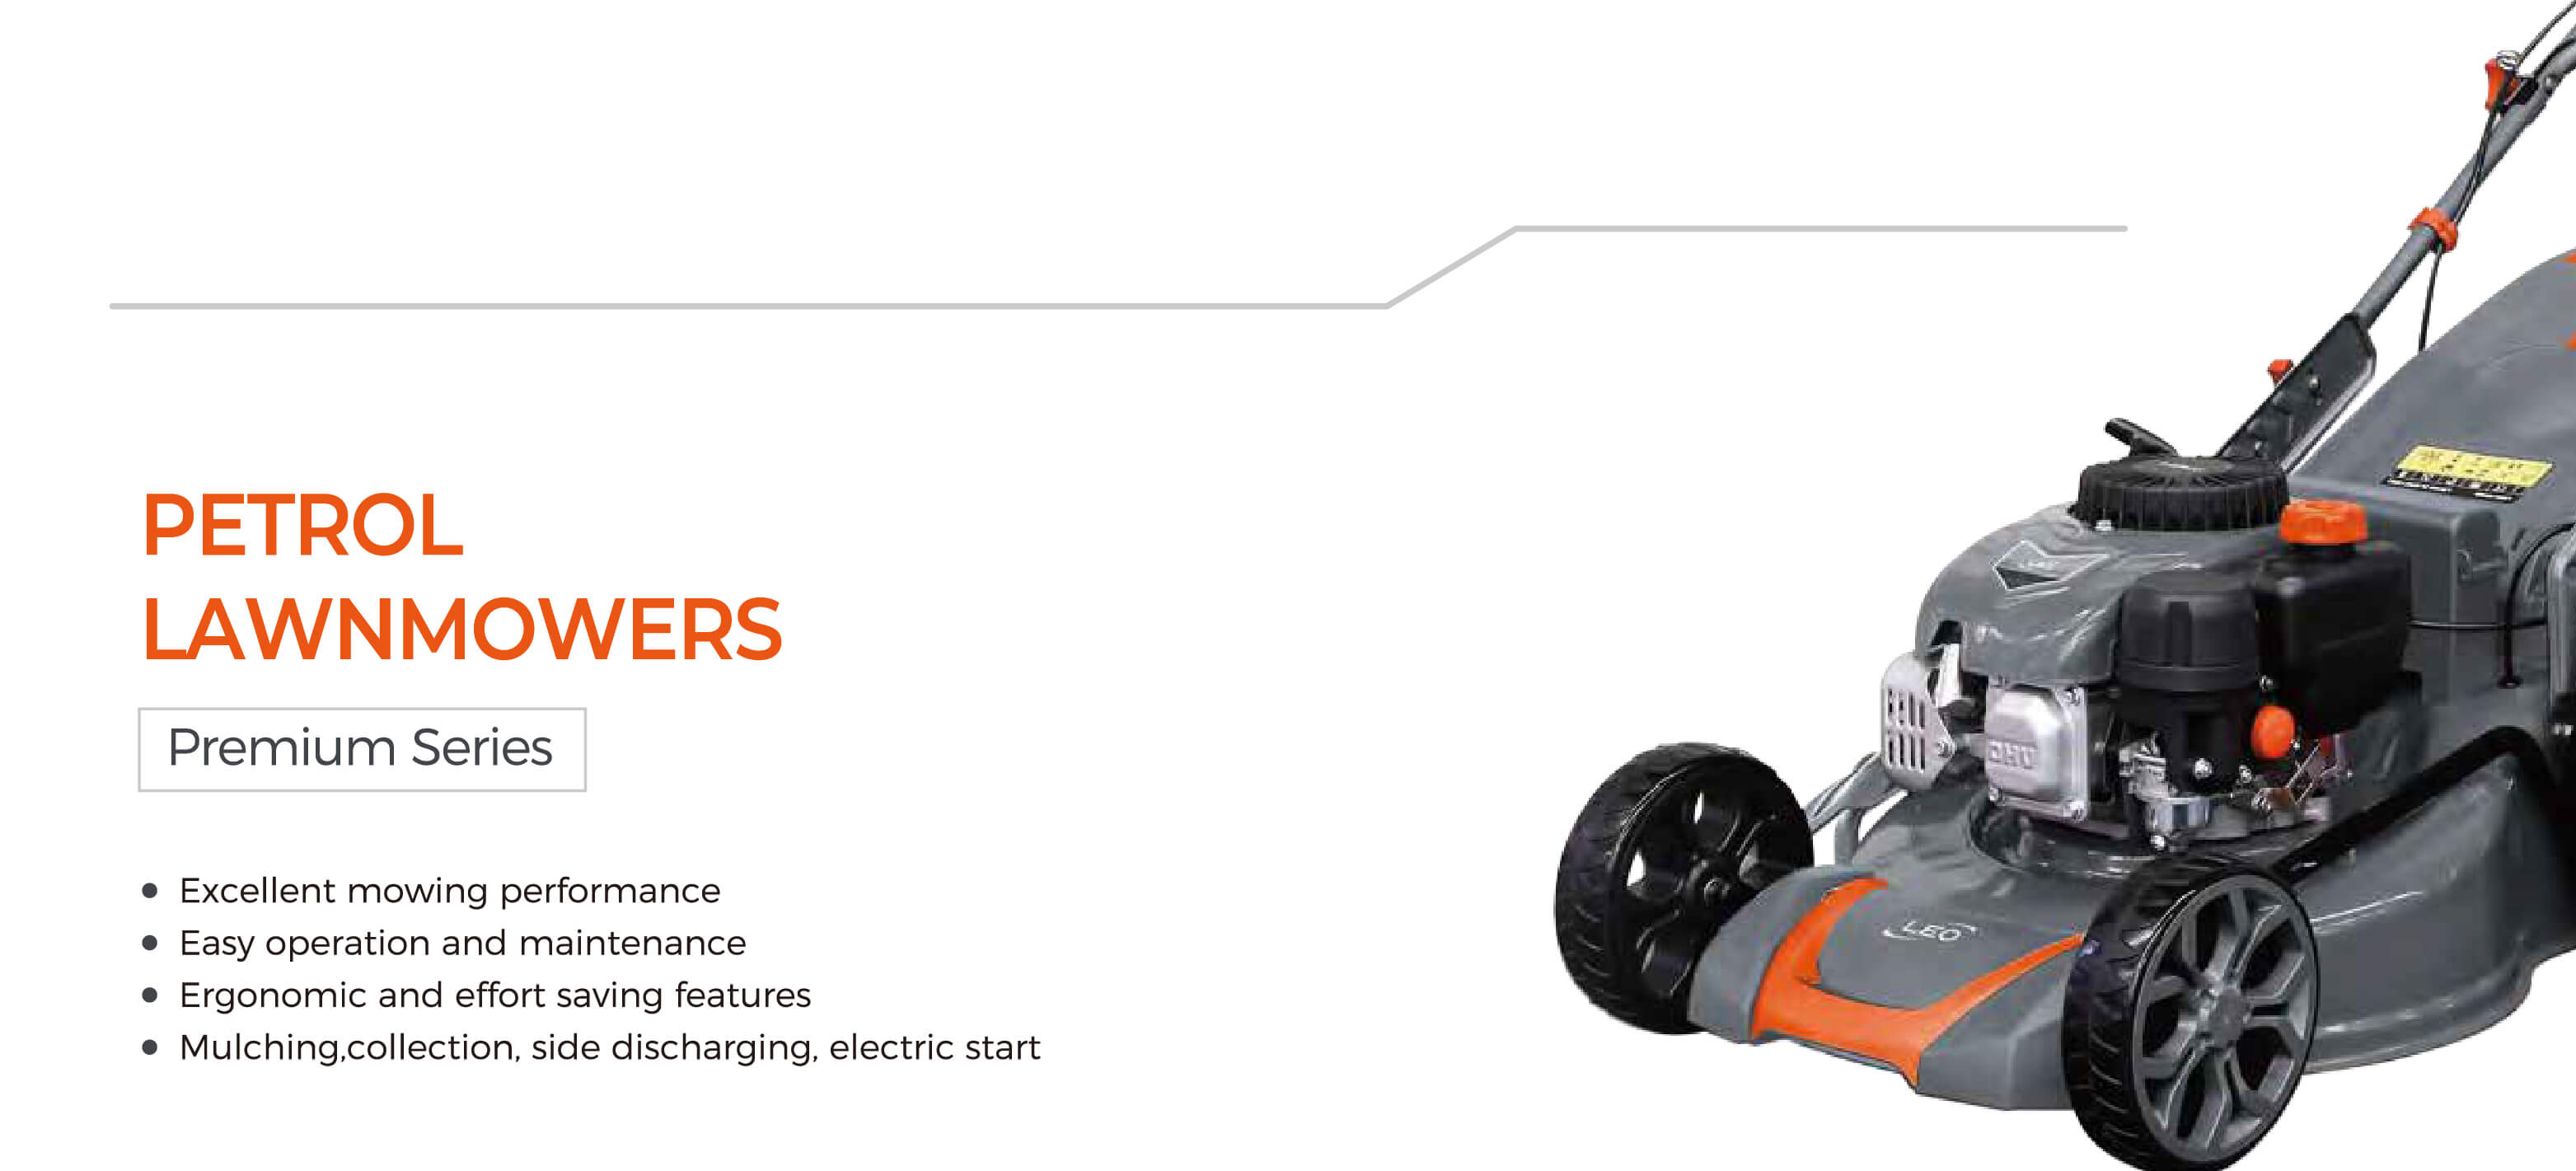 LM-2L Petrol Lawnmowers Features